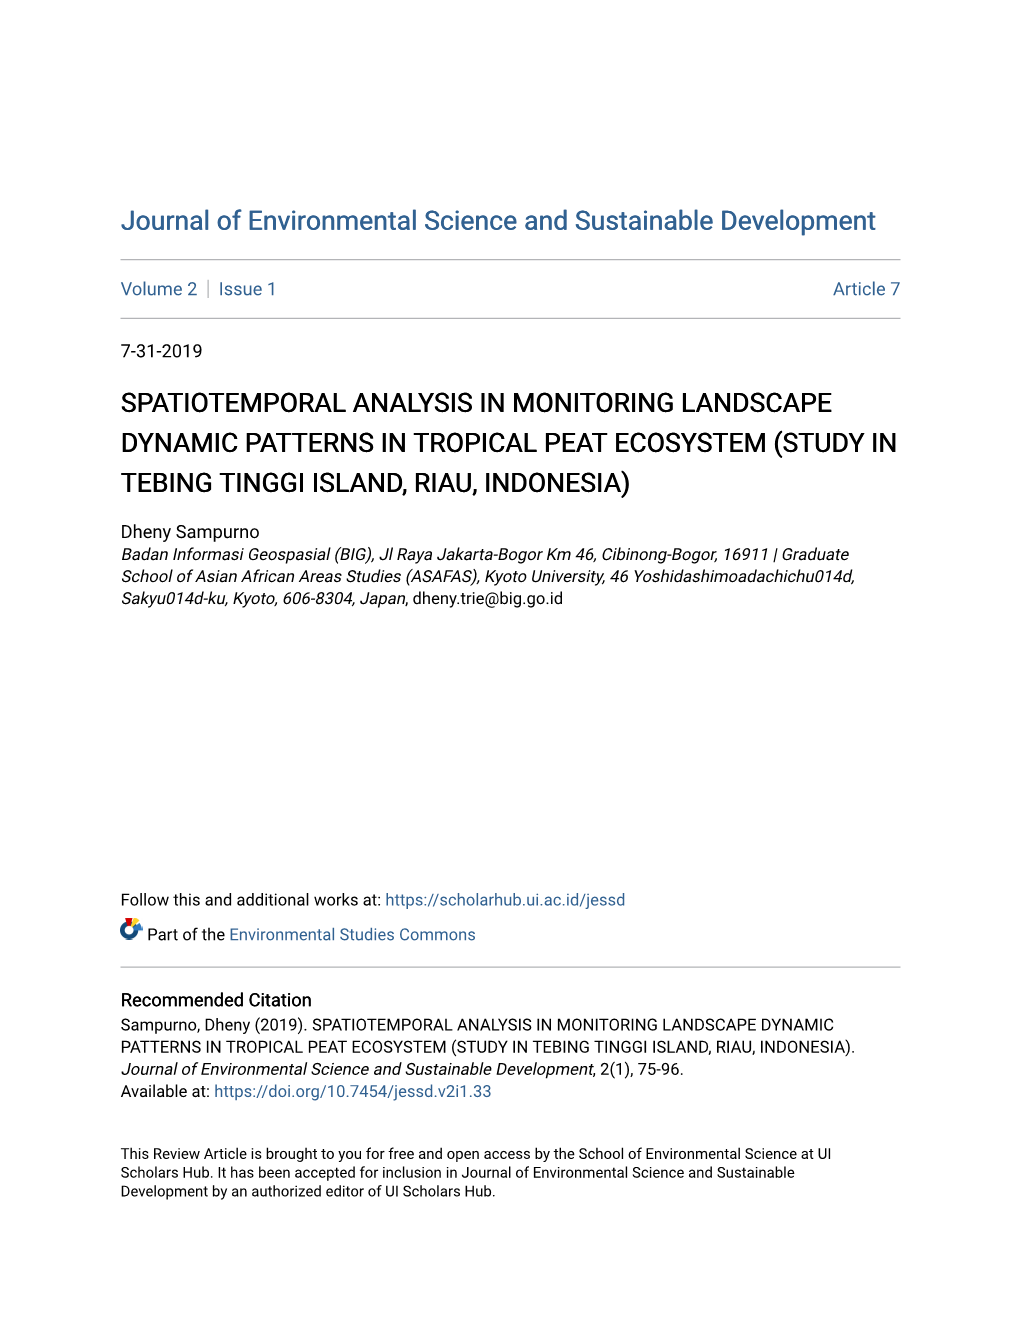 Spatiotemporal Analysis in Monitoring Landscape Dynamic Patterns in Tropical Peat Ecosystem (Study in Tebing Tinggi Island, Riau, Indonesia)